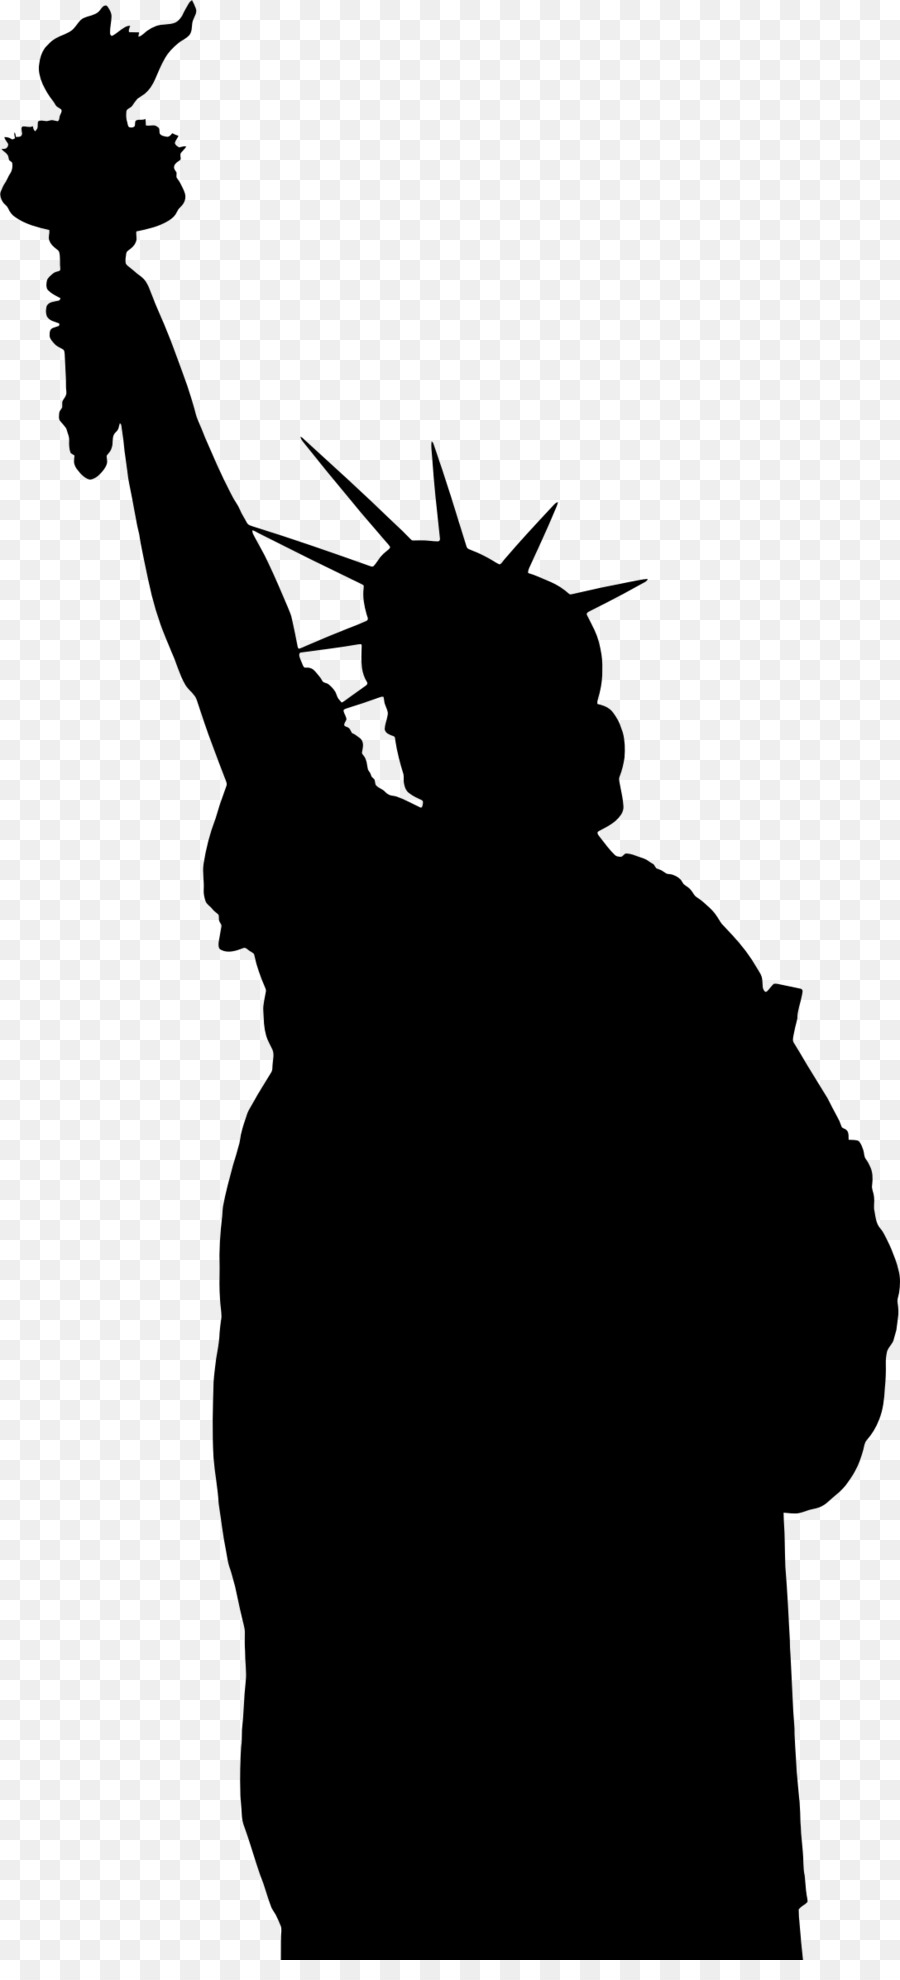 Statue of Liberty Silhouette Clip art - statue of liberty png download - 1088*2370 - Free Transparent Statue Of Liberty png Download.